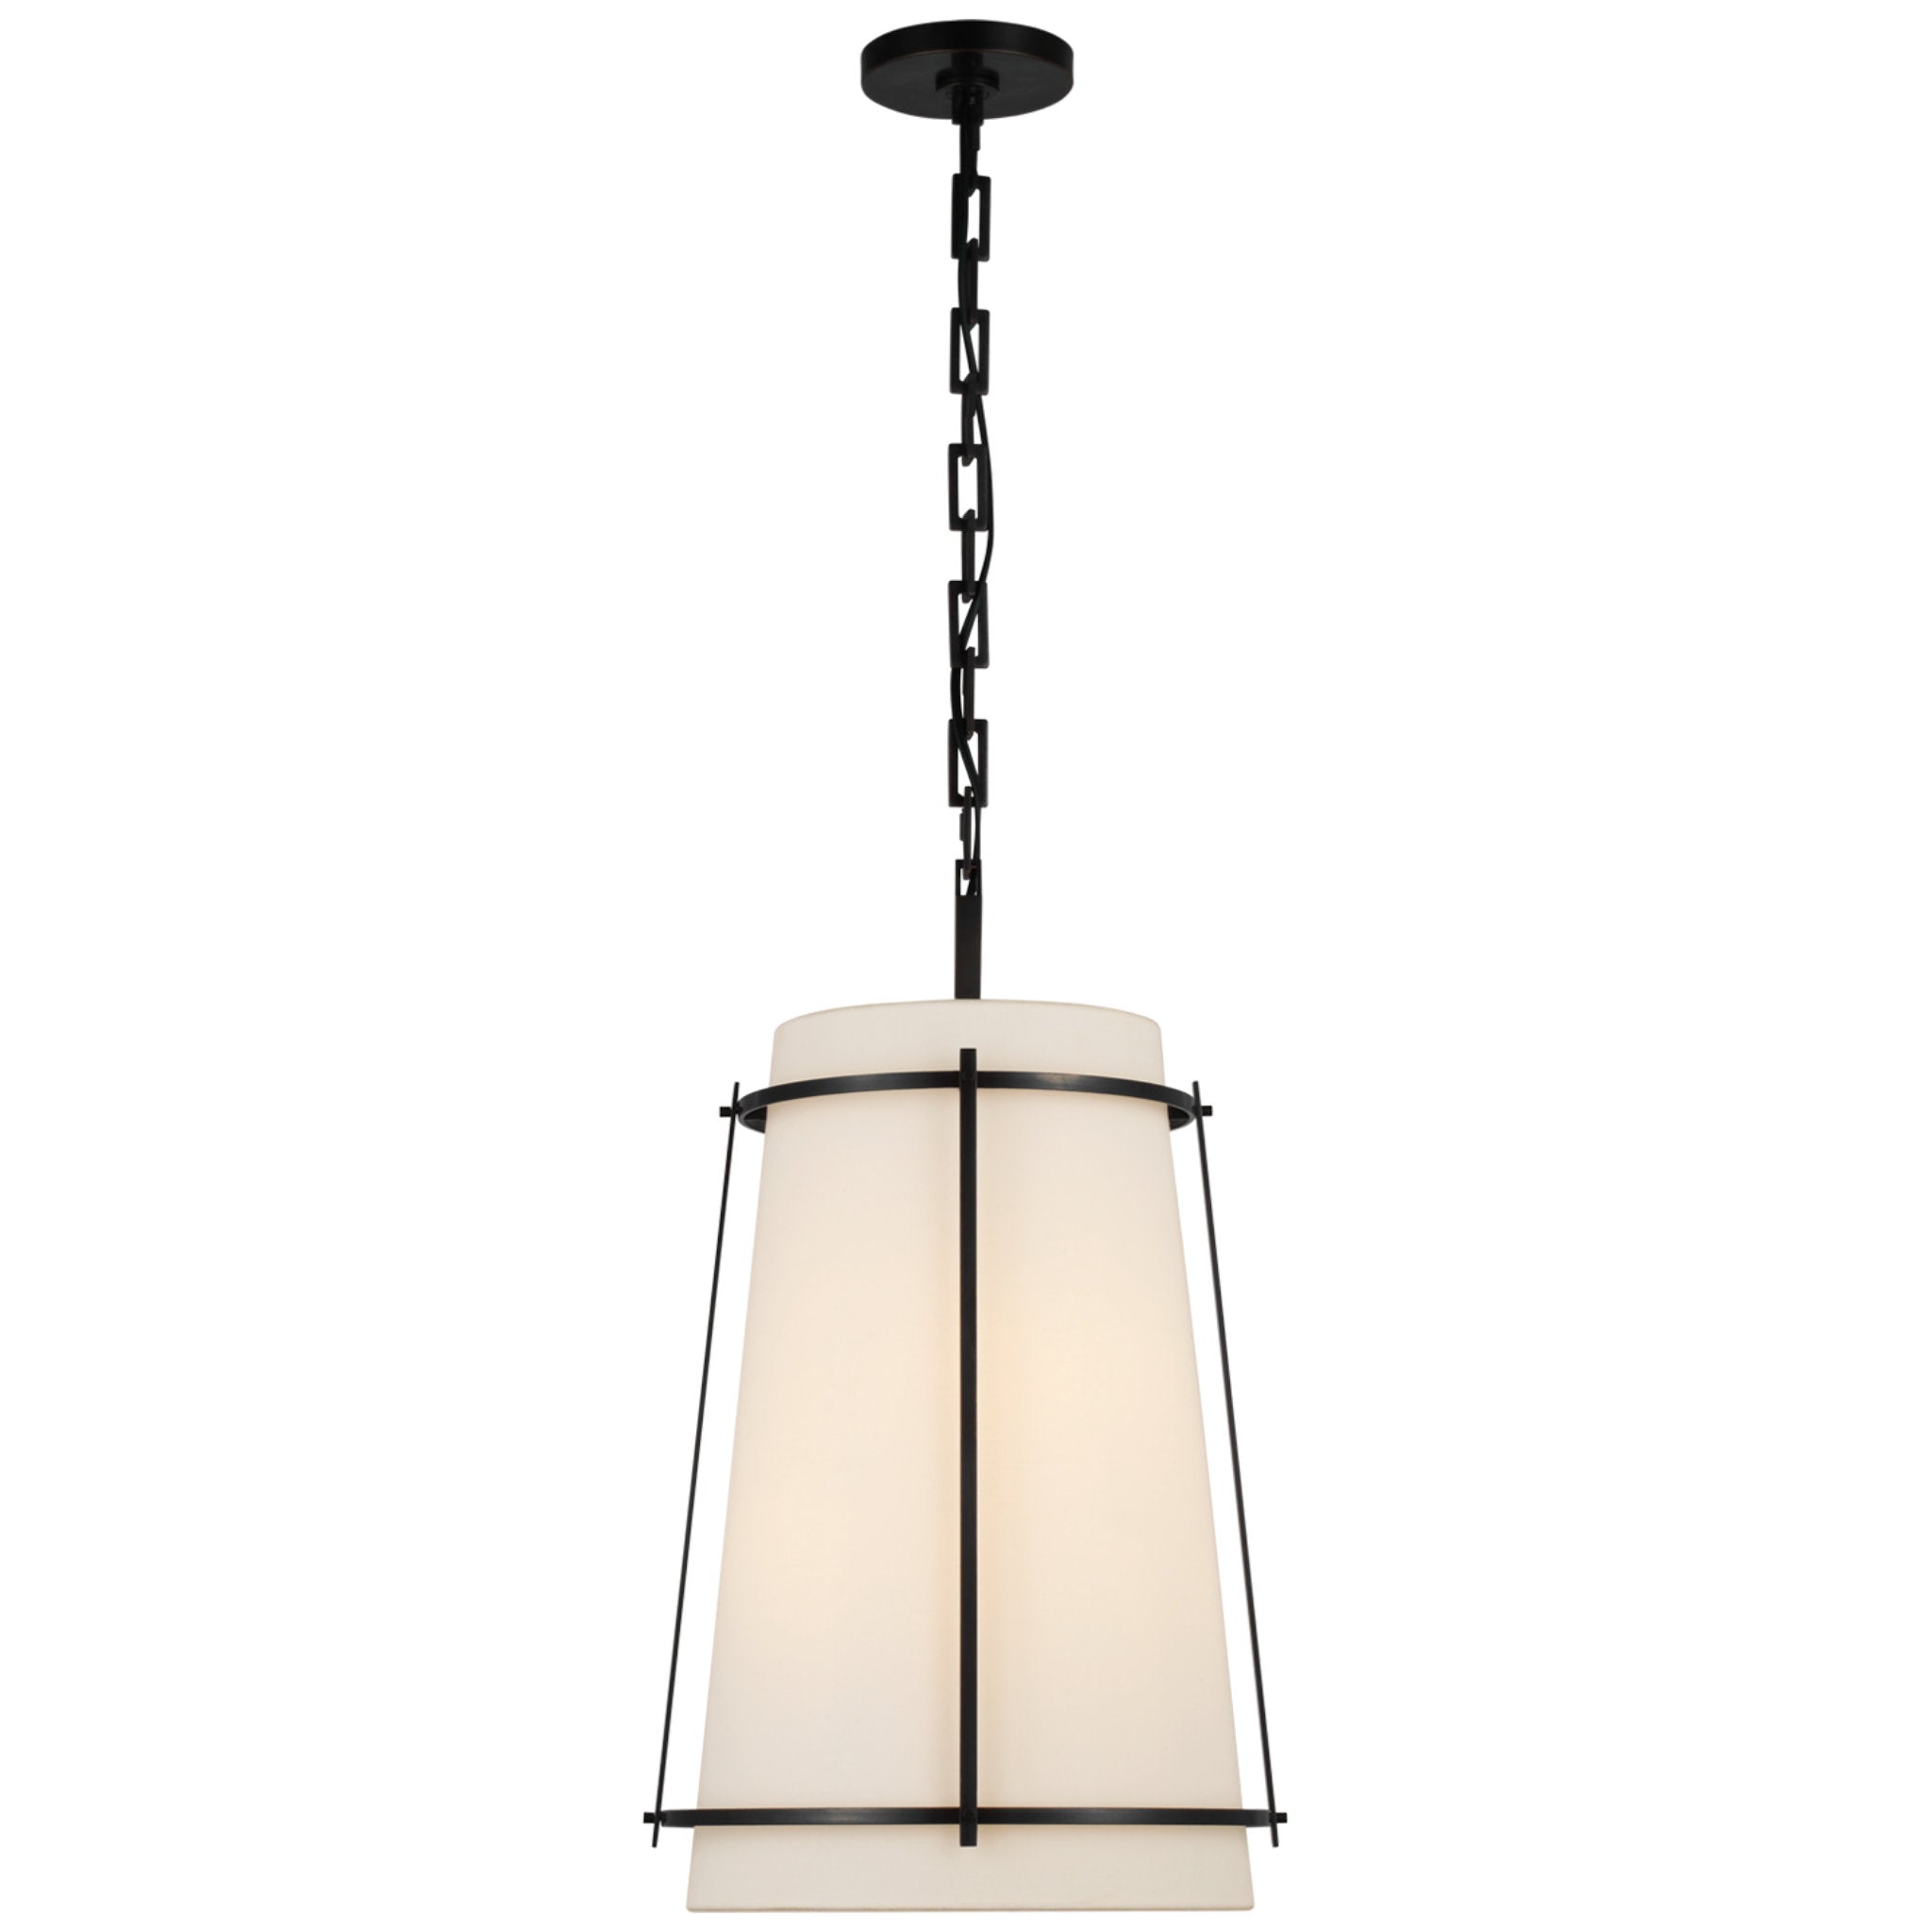 Carrier and Company Callaway Medium Hanging Shade in Bronze with Linen Shade and Frosted Acrylic Diffuser